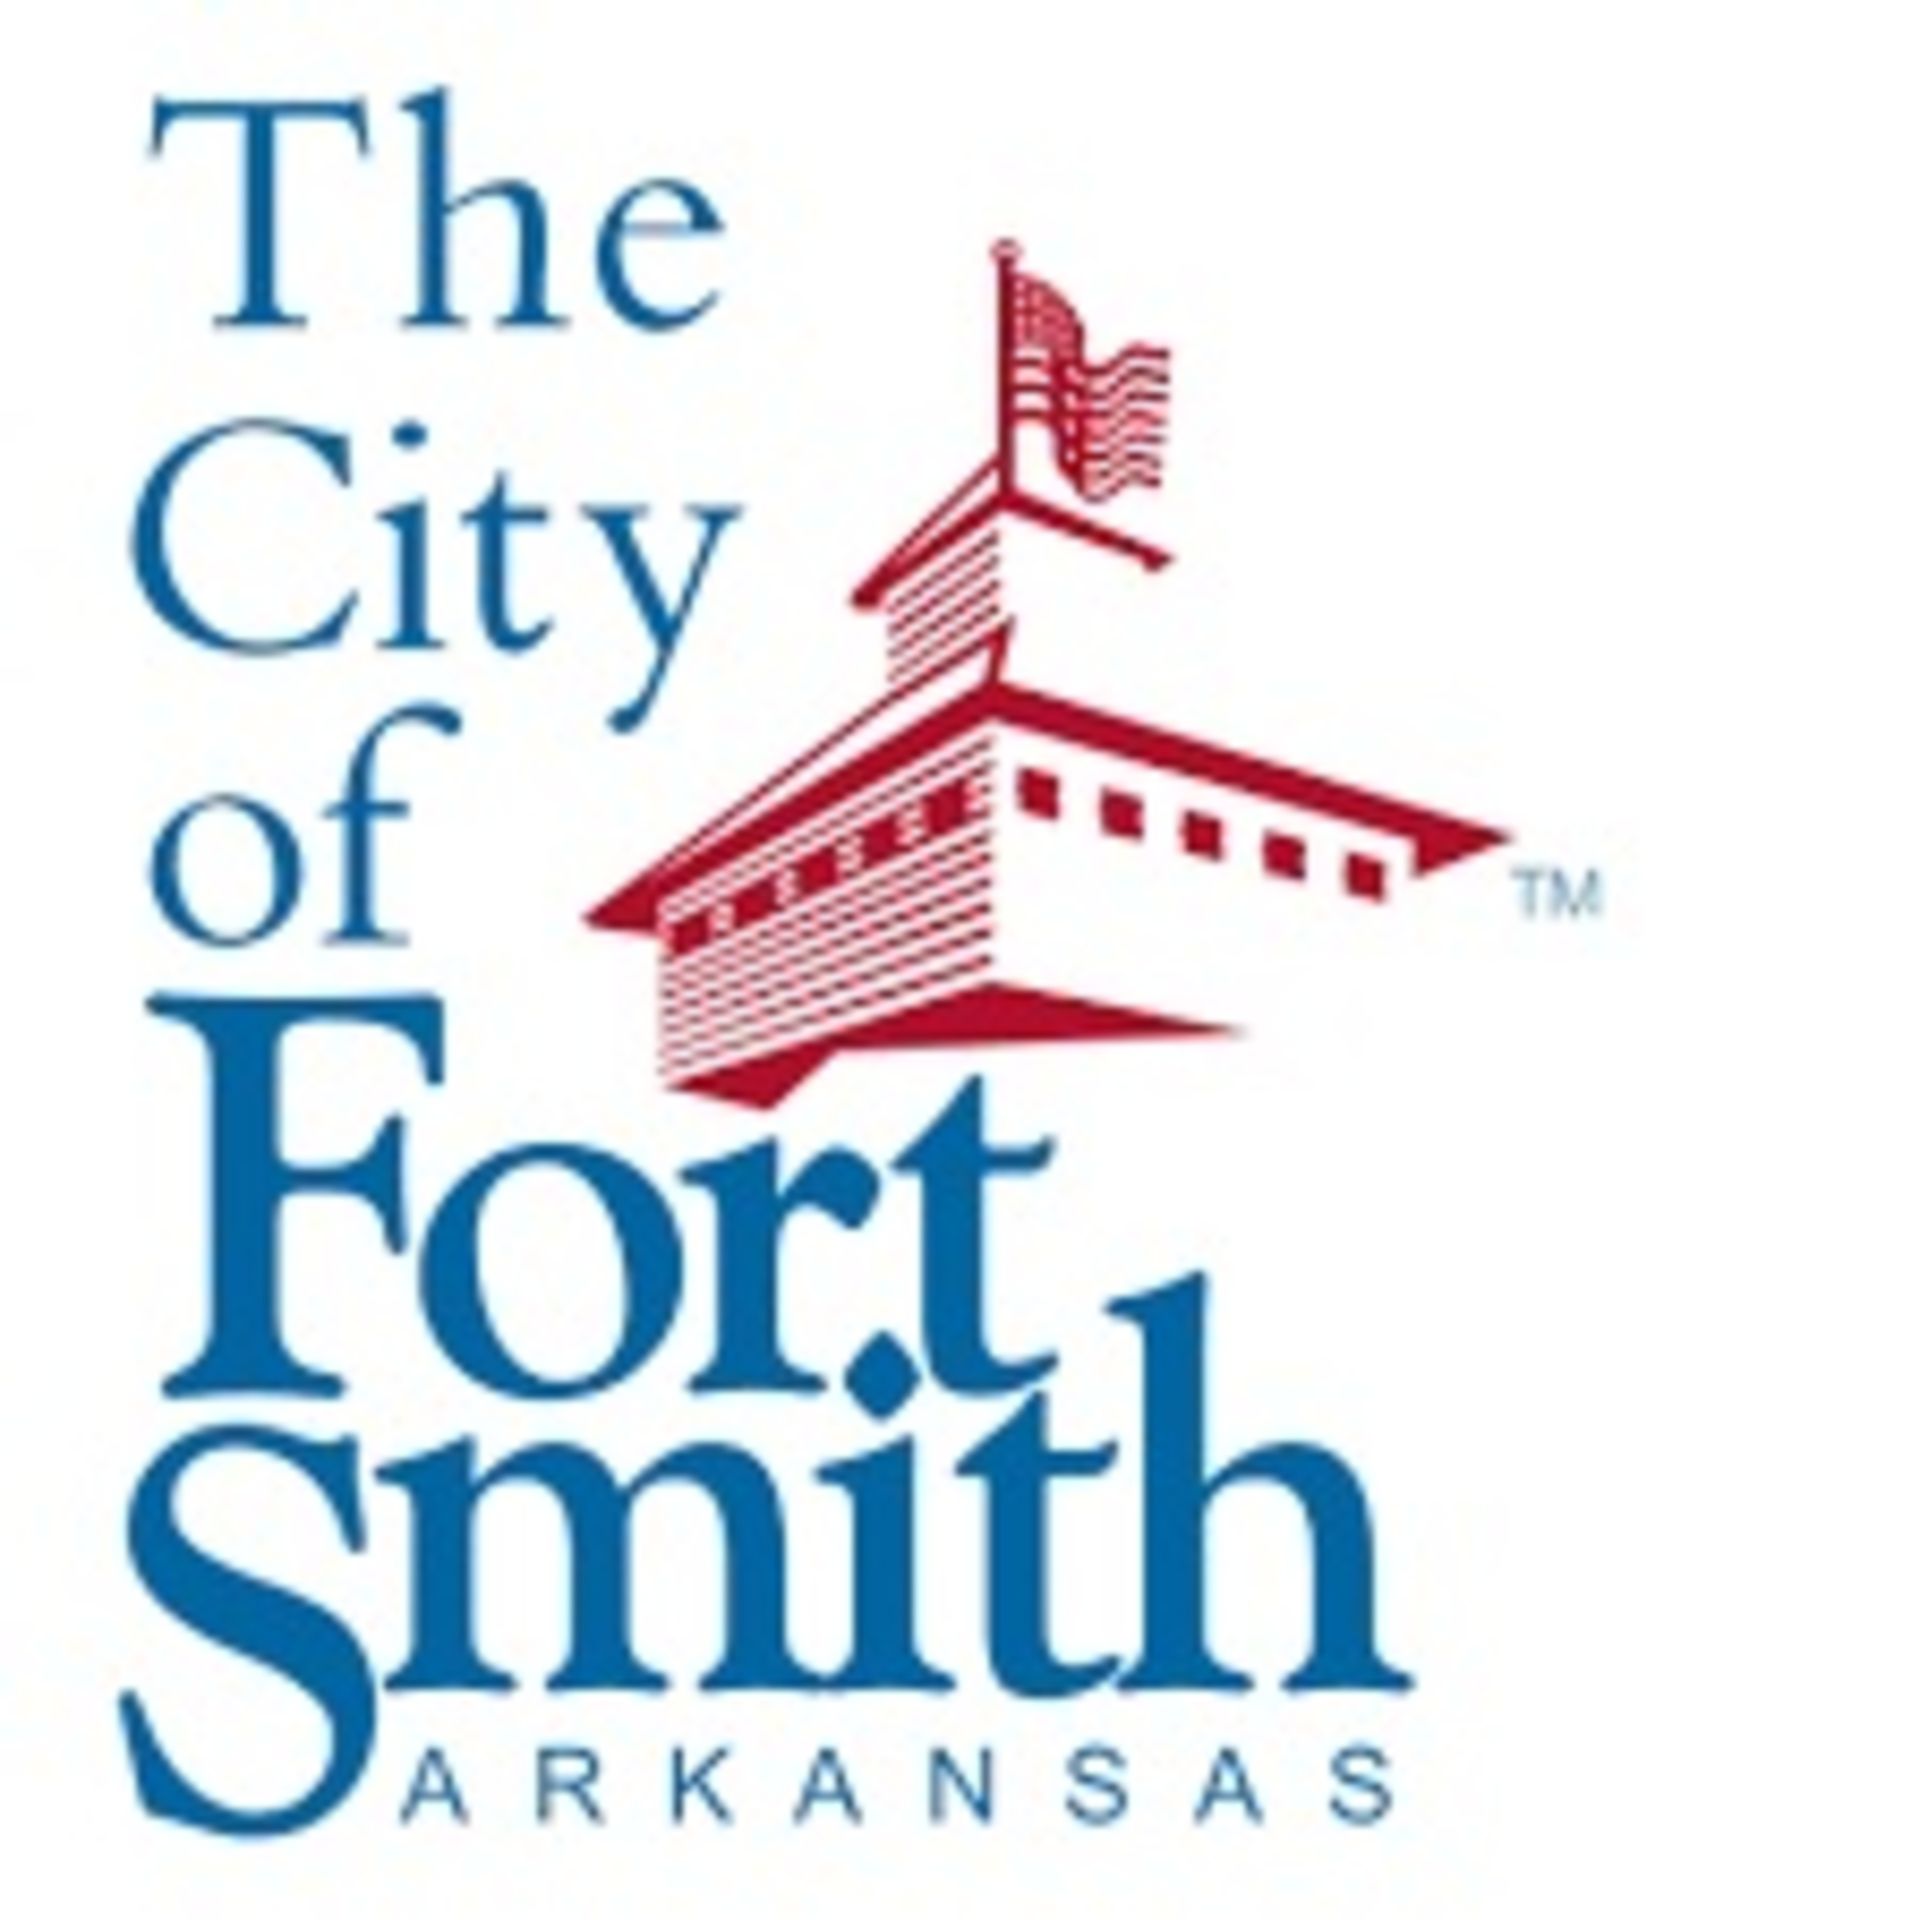 City of: Ft. Smith, Ar. Surplus Property Auction - This Lot Number is for ADVERTISEMENT ONLY!!